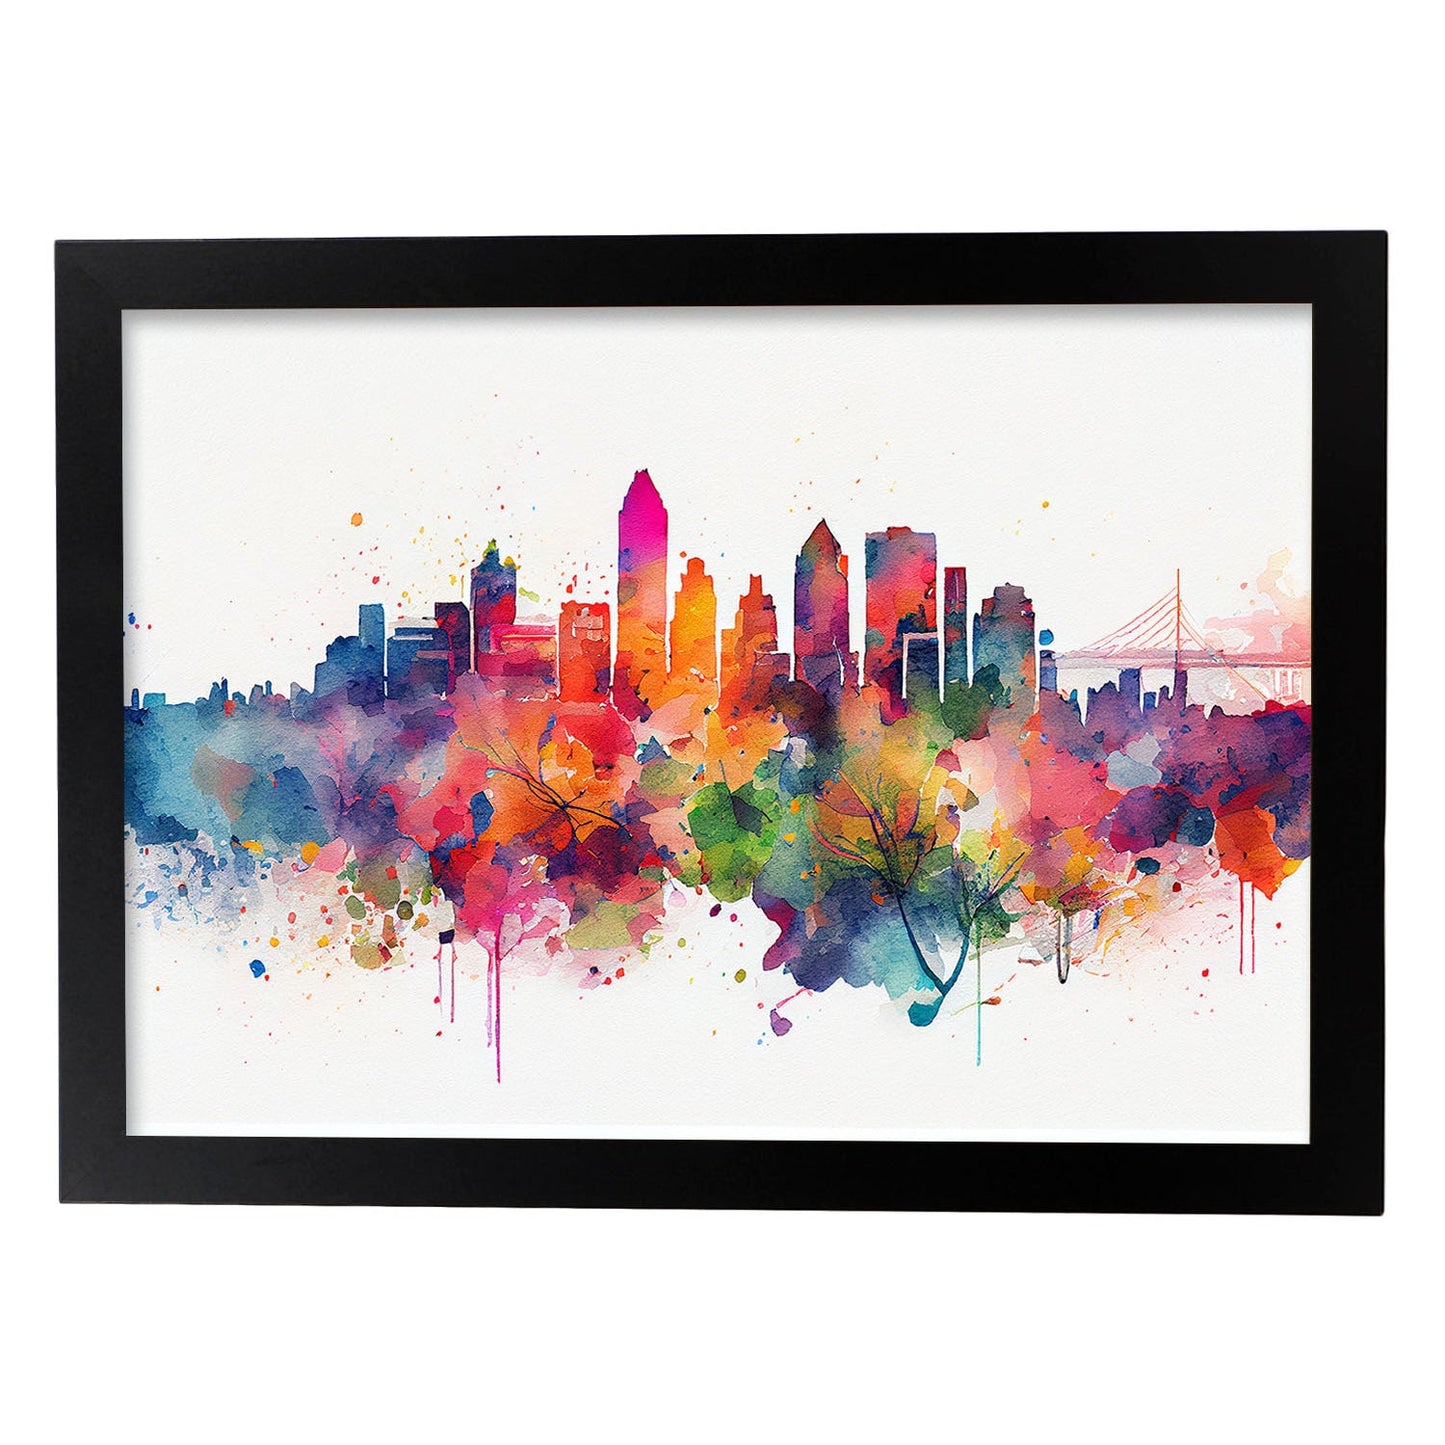 Nacnic watercolor of a skyline of the city of Montreal_1. Aesthetic Wall Art Prints for Bedroom or Living Room Design.